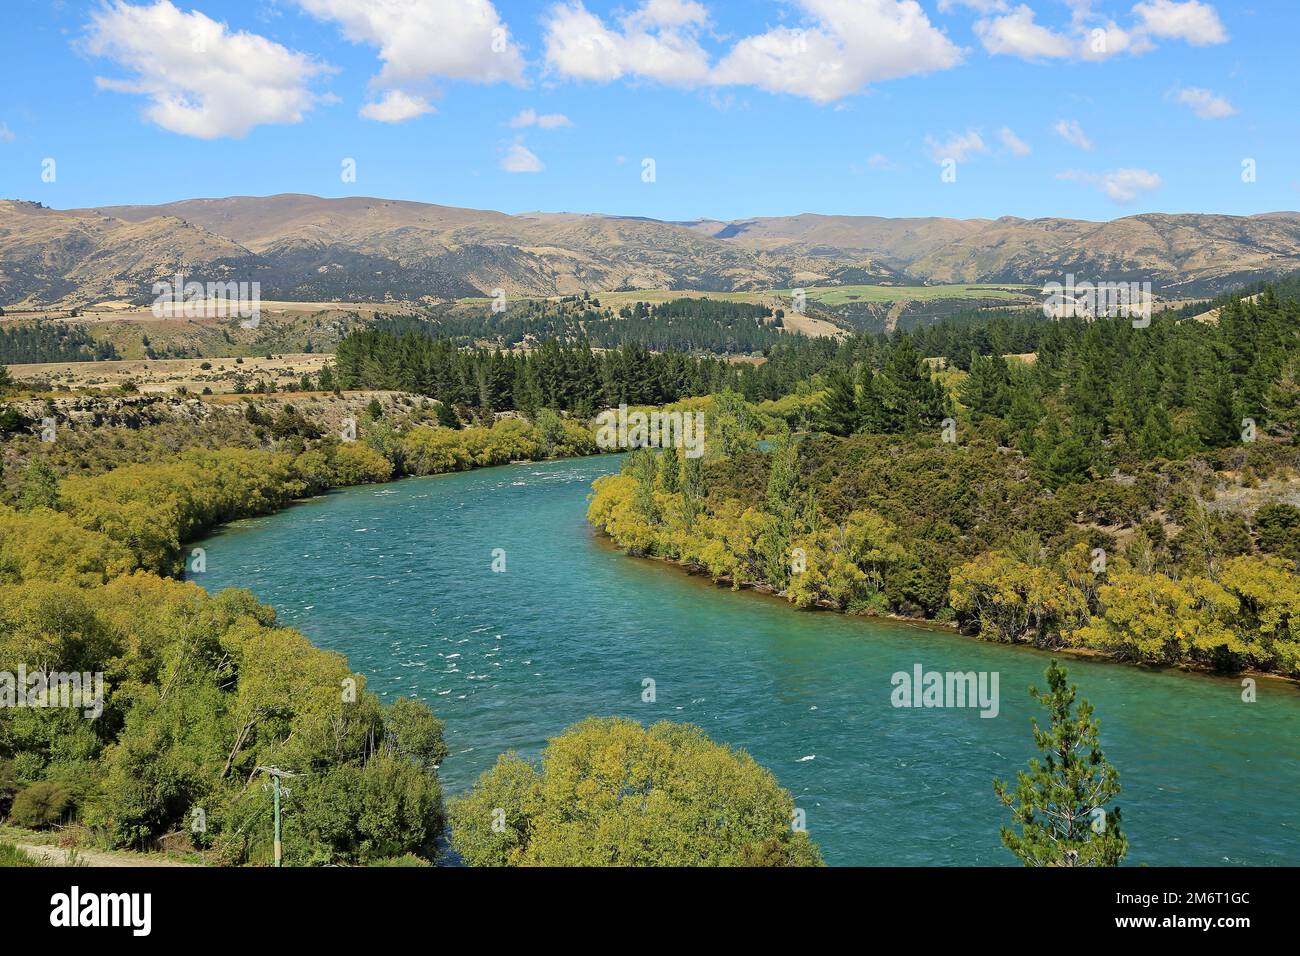 Landscape with Clutha River, New Zealand Stock Photo